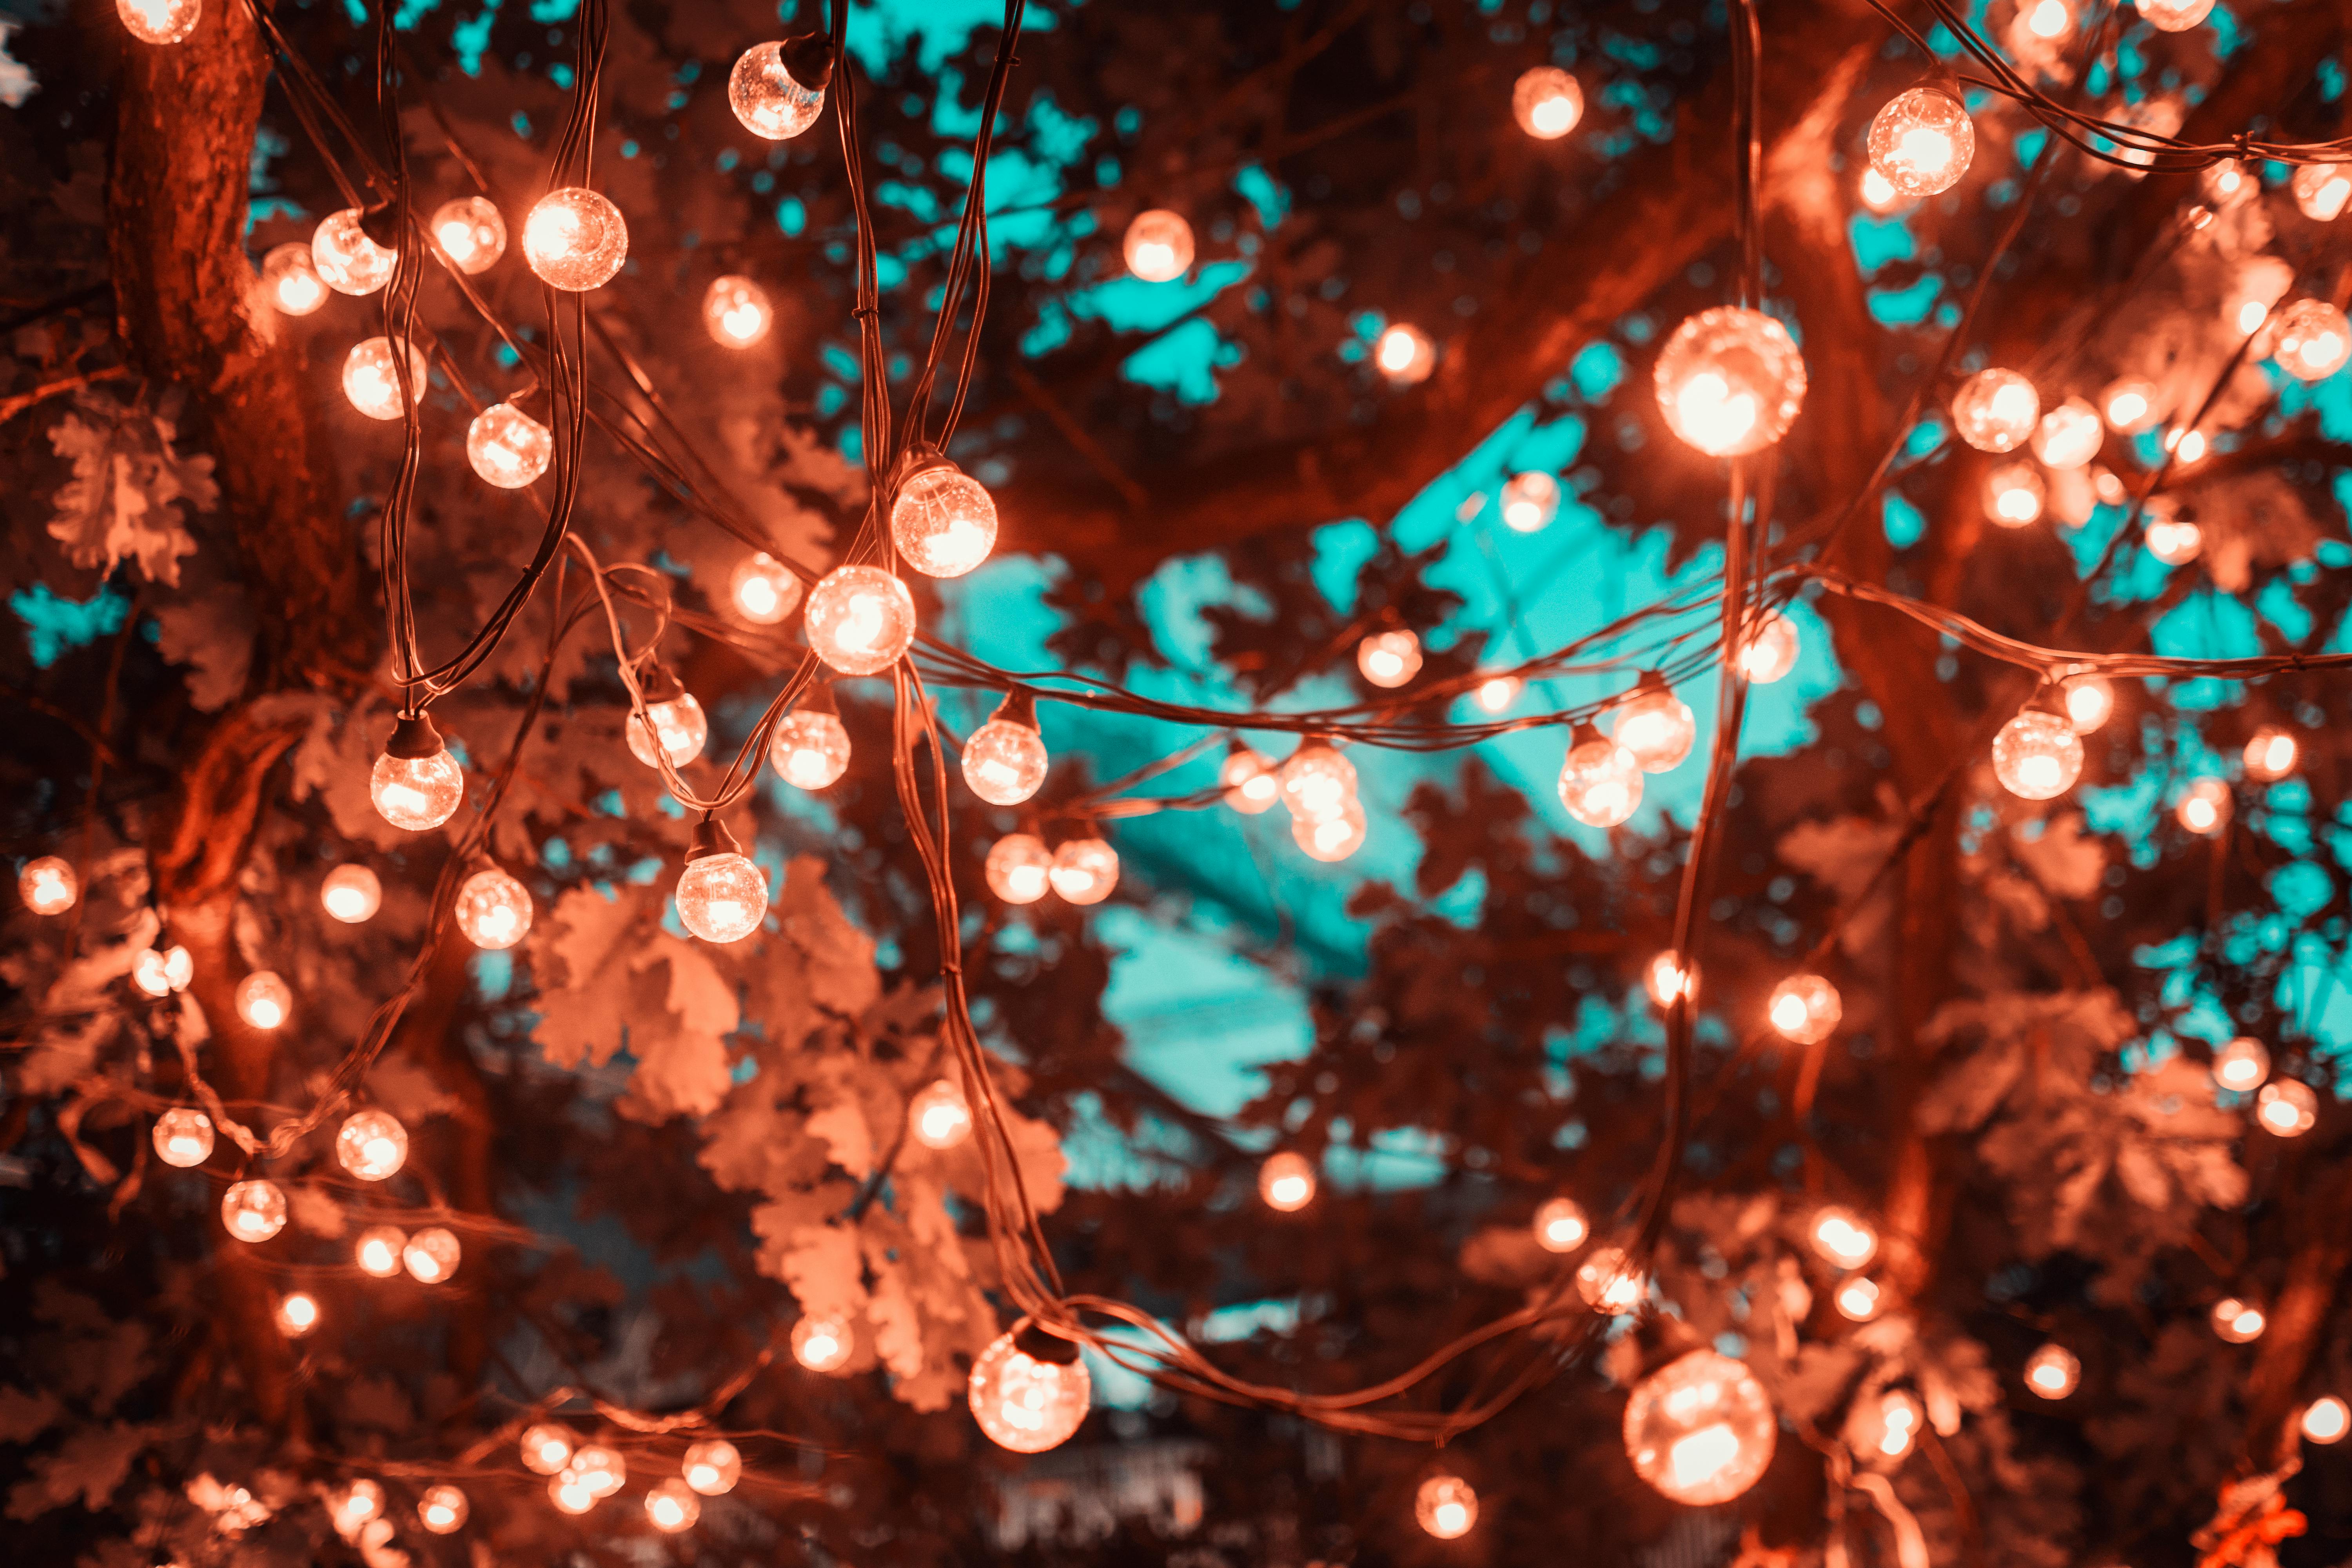 100+] Fairy Lights Aesthetic Wallpapers | Wallpapers.com